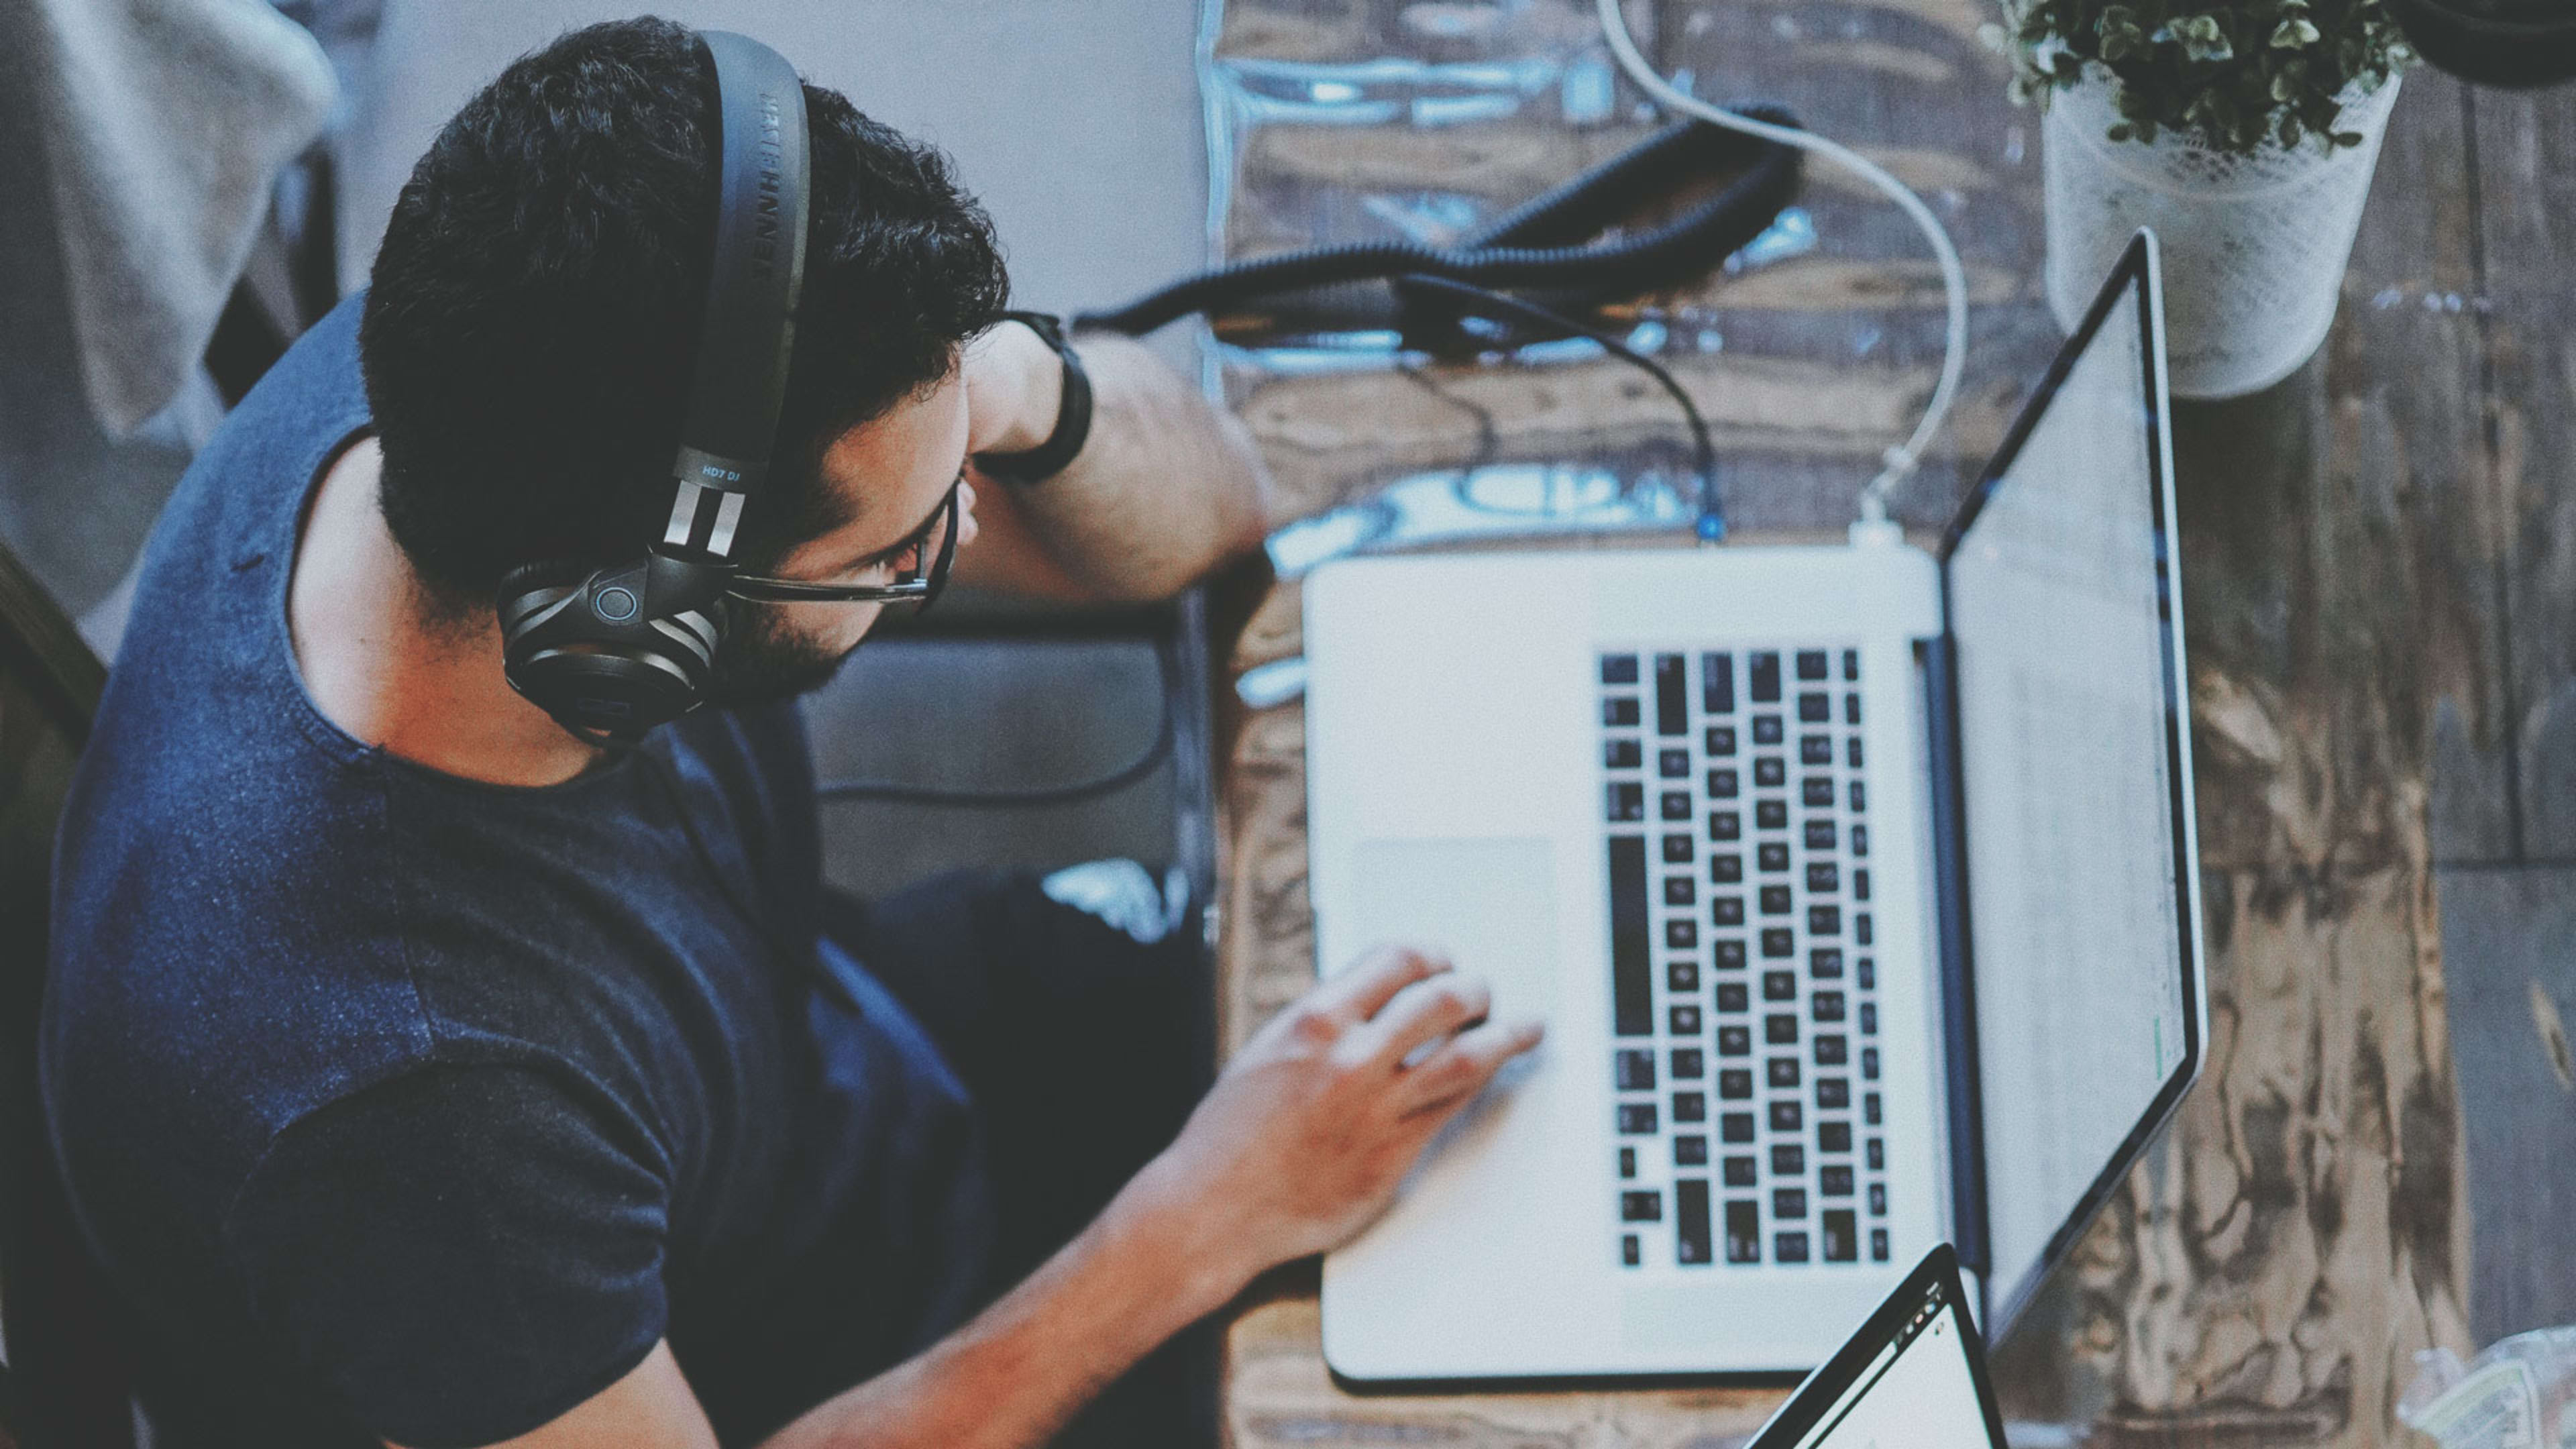 This is what kind of music you should listen to at work to be more productive